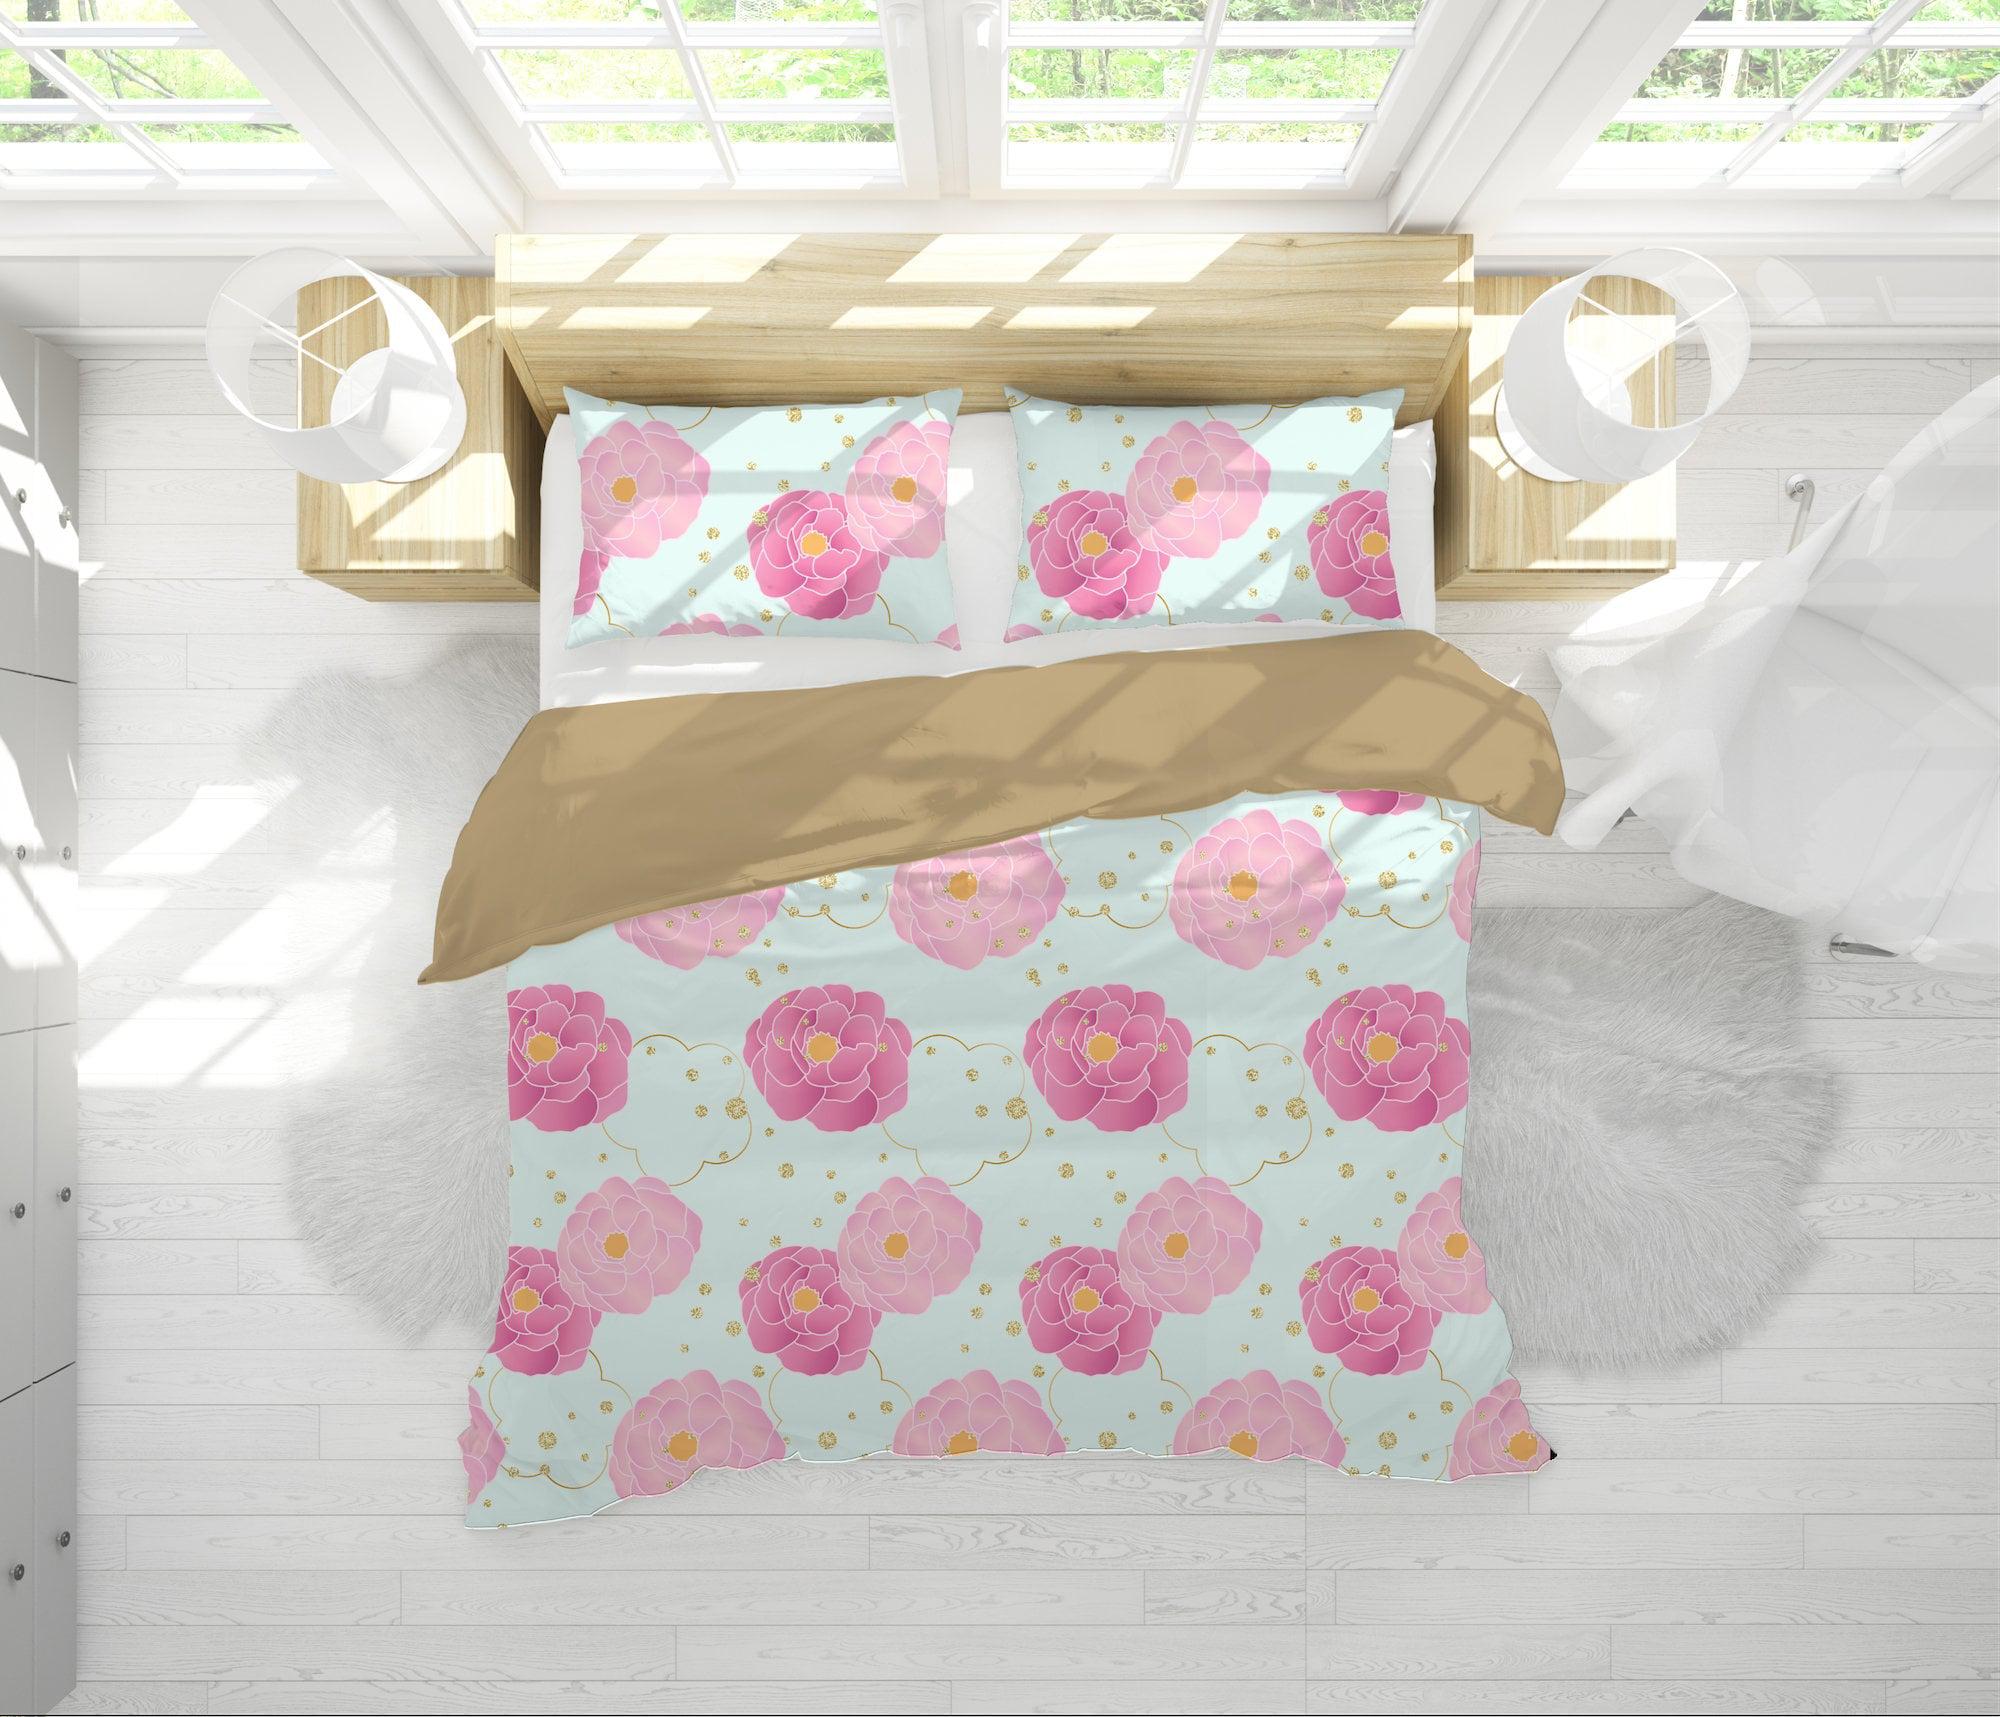 daintyduvet Sky Blue Bedding Set Pink Camellia Flowers, Handmade Colorful Duvet Cover with Pillow Case